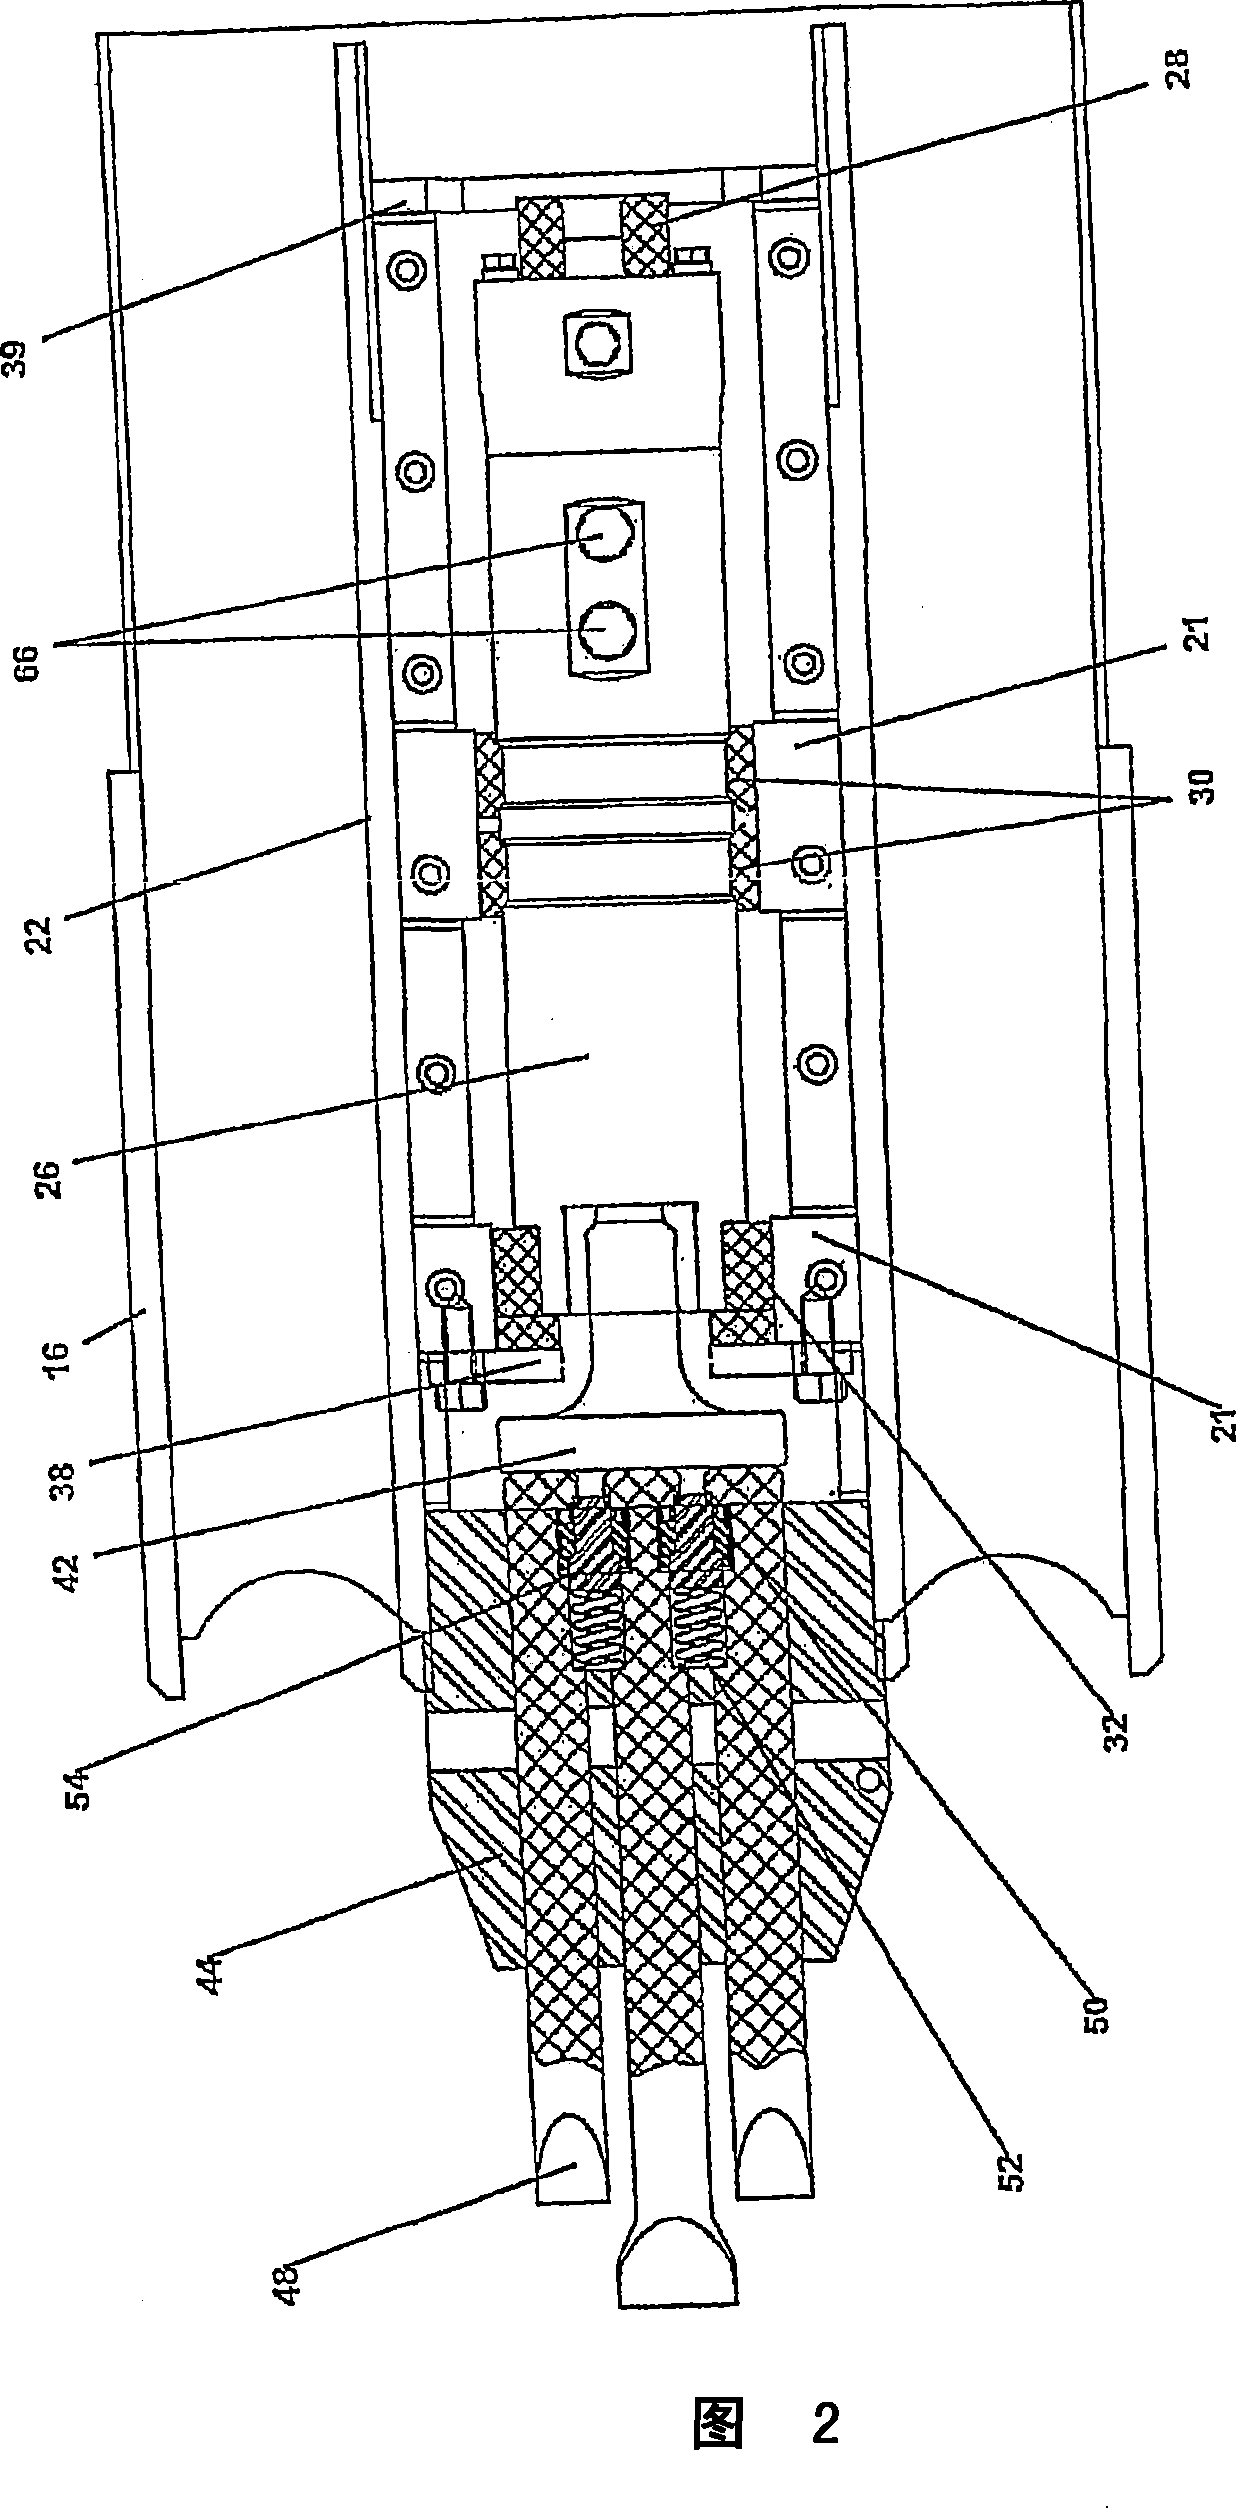 Hydraulically actuated impact apparatus